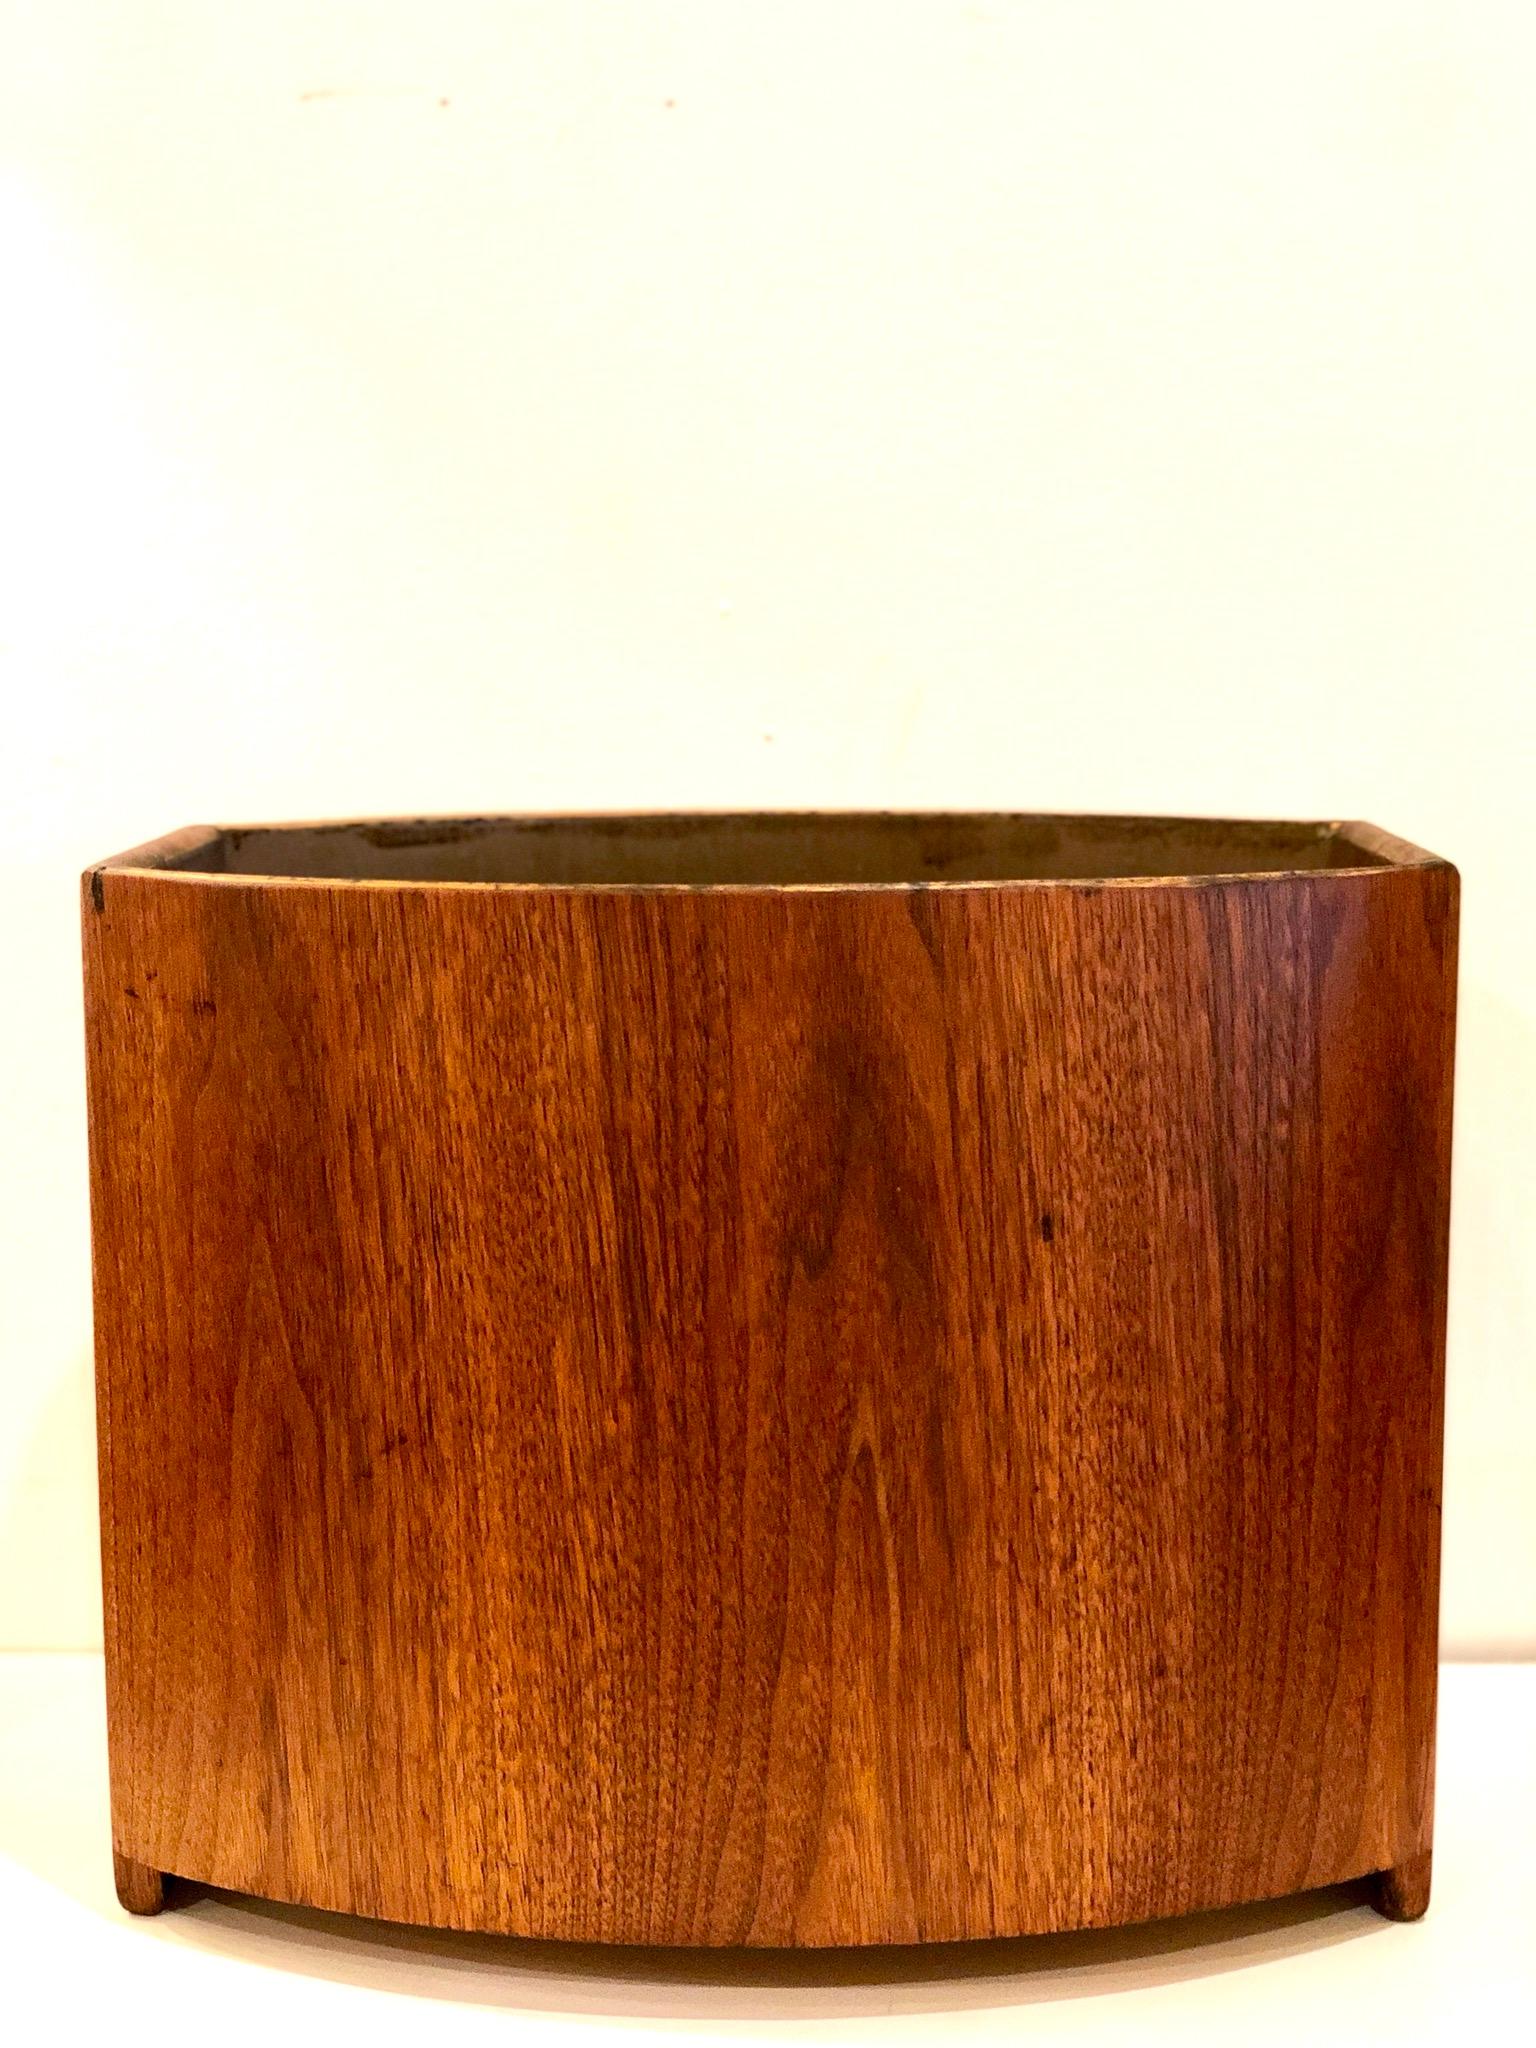 20th Century American Mid-Century Modern Rare Large Wastebasket with Handles by Stow Davis